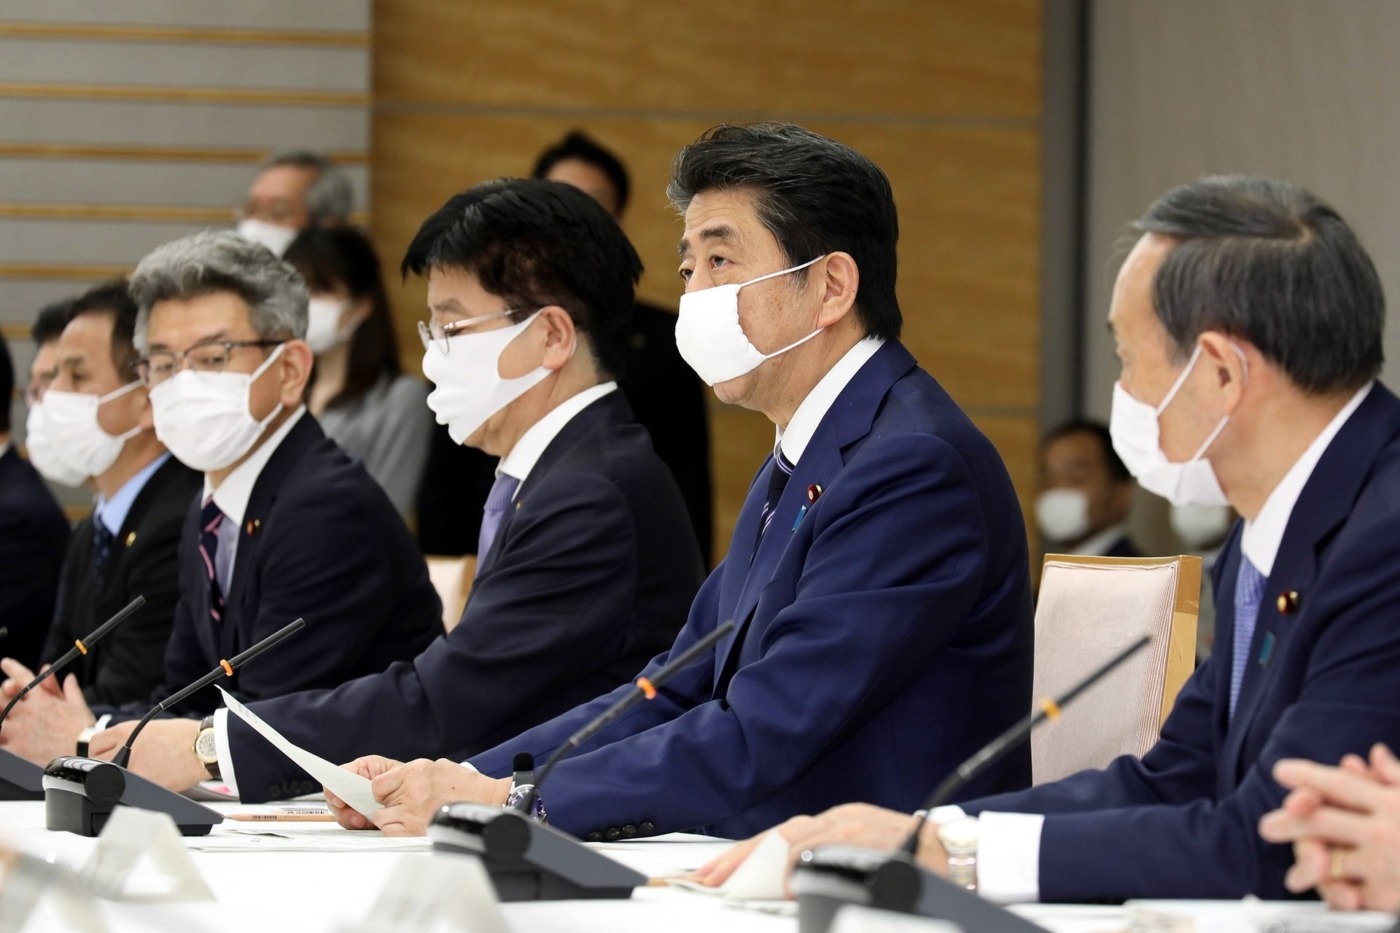 Japanese ministers sitting at a table / Image: Wikimedia Commons